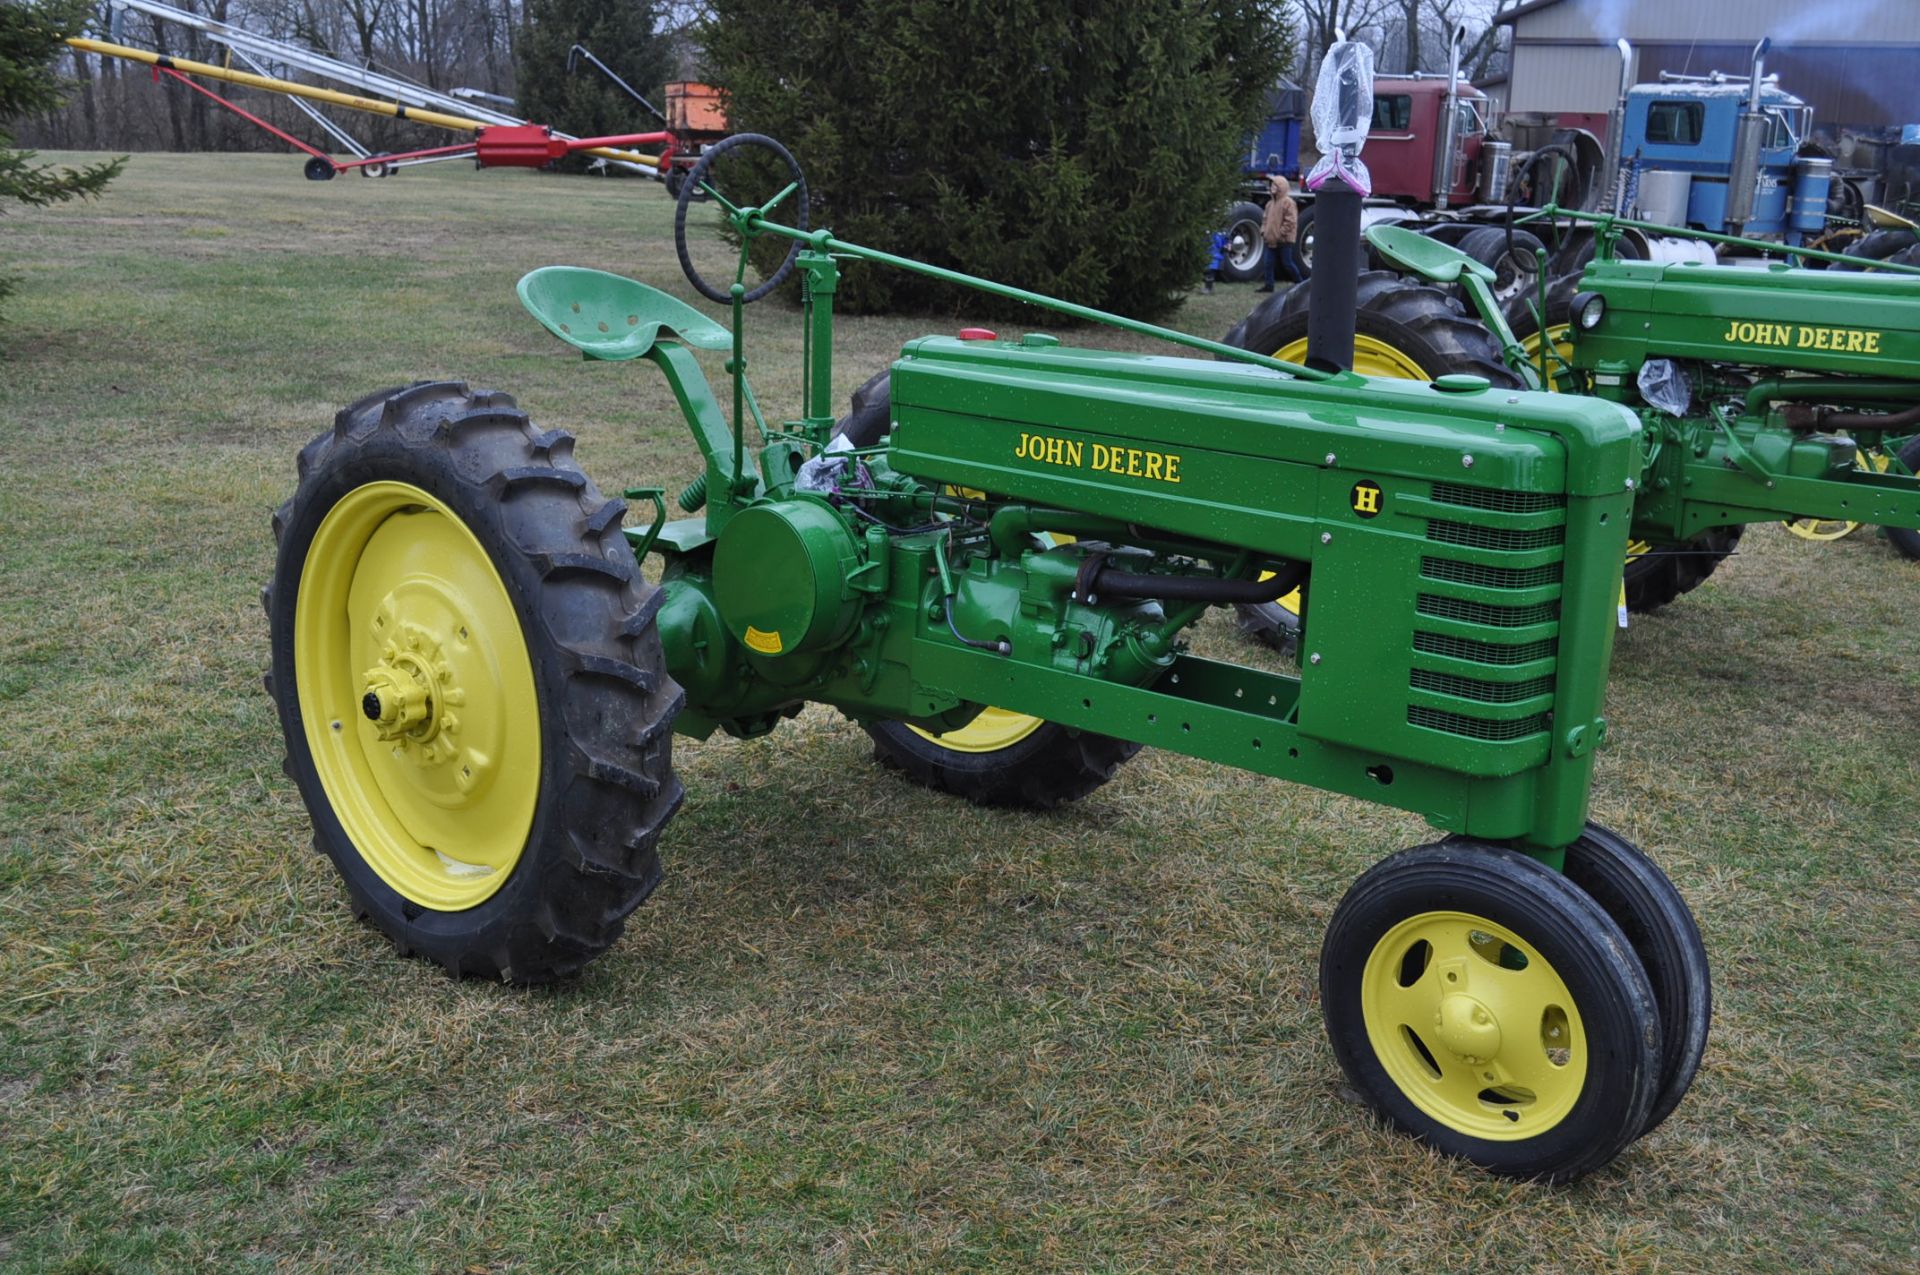 John Deere H tractor, NEW 9.5-32 rear, narrow front, 540 pto, SN H-7475 - Image 4 of 12